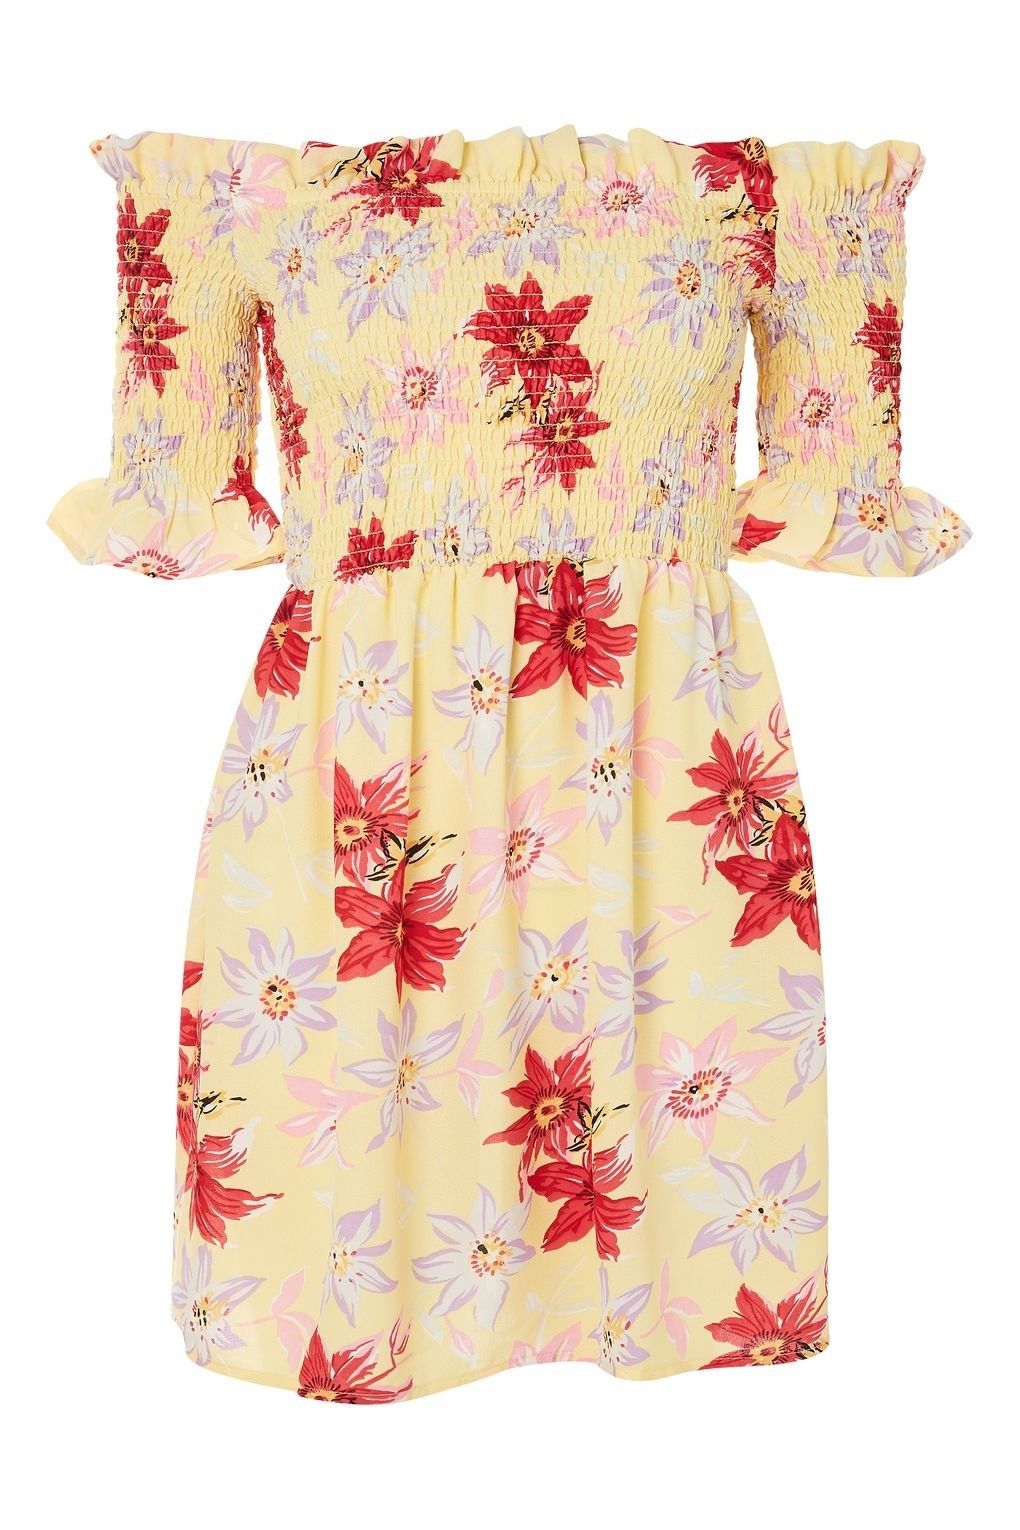 33 Spring Dresses That'll Make You Break Up With Your Jeans